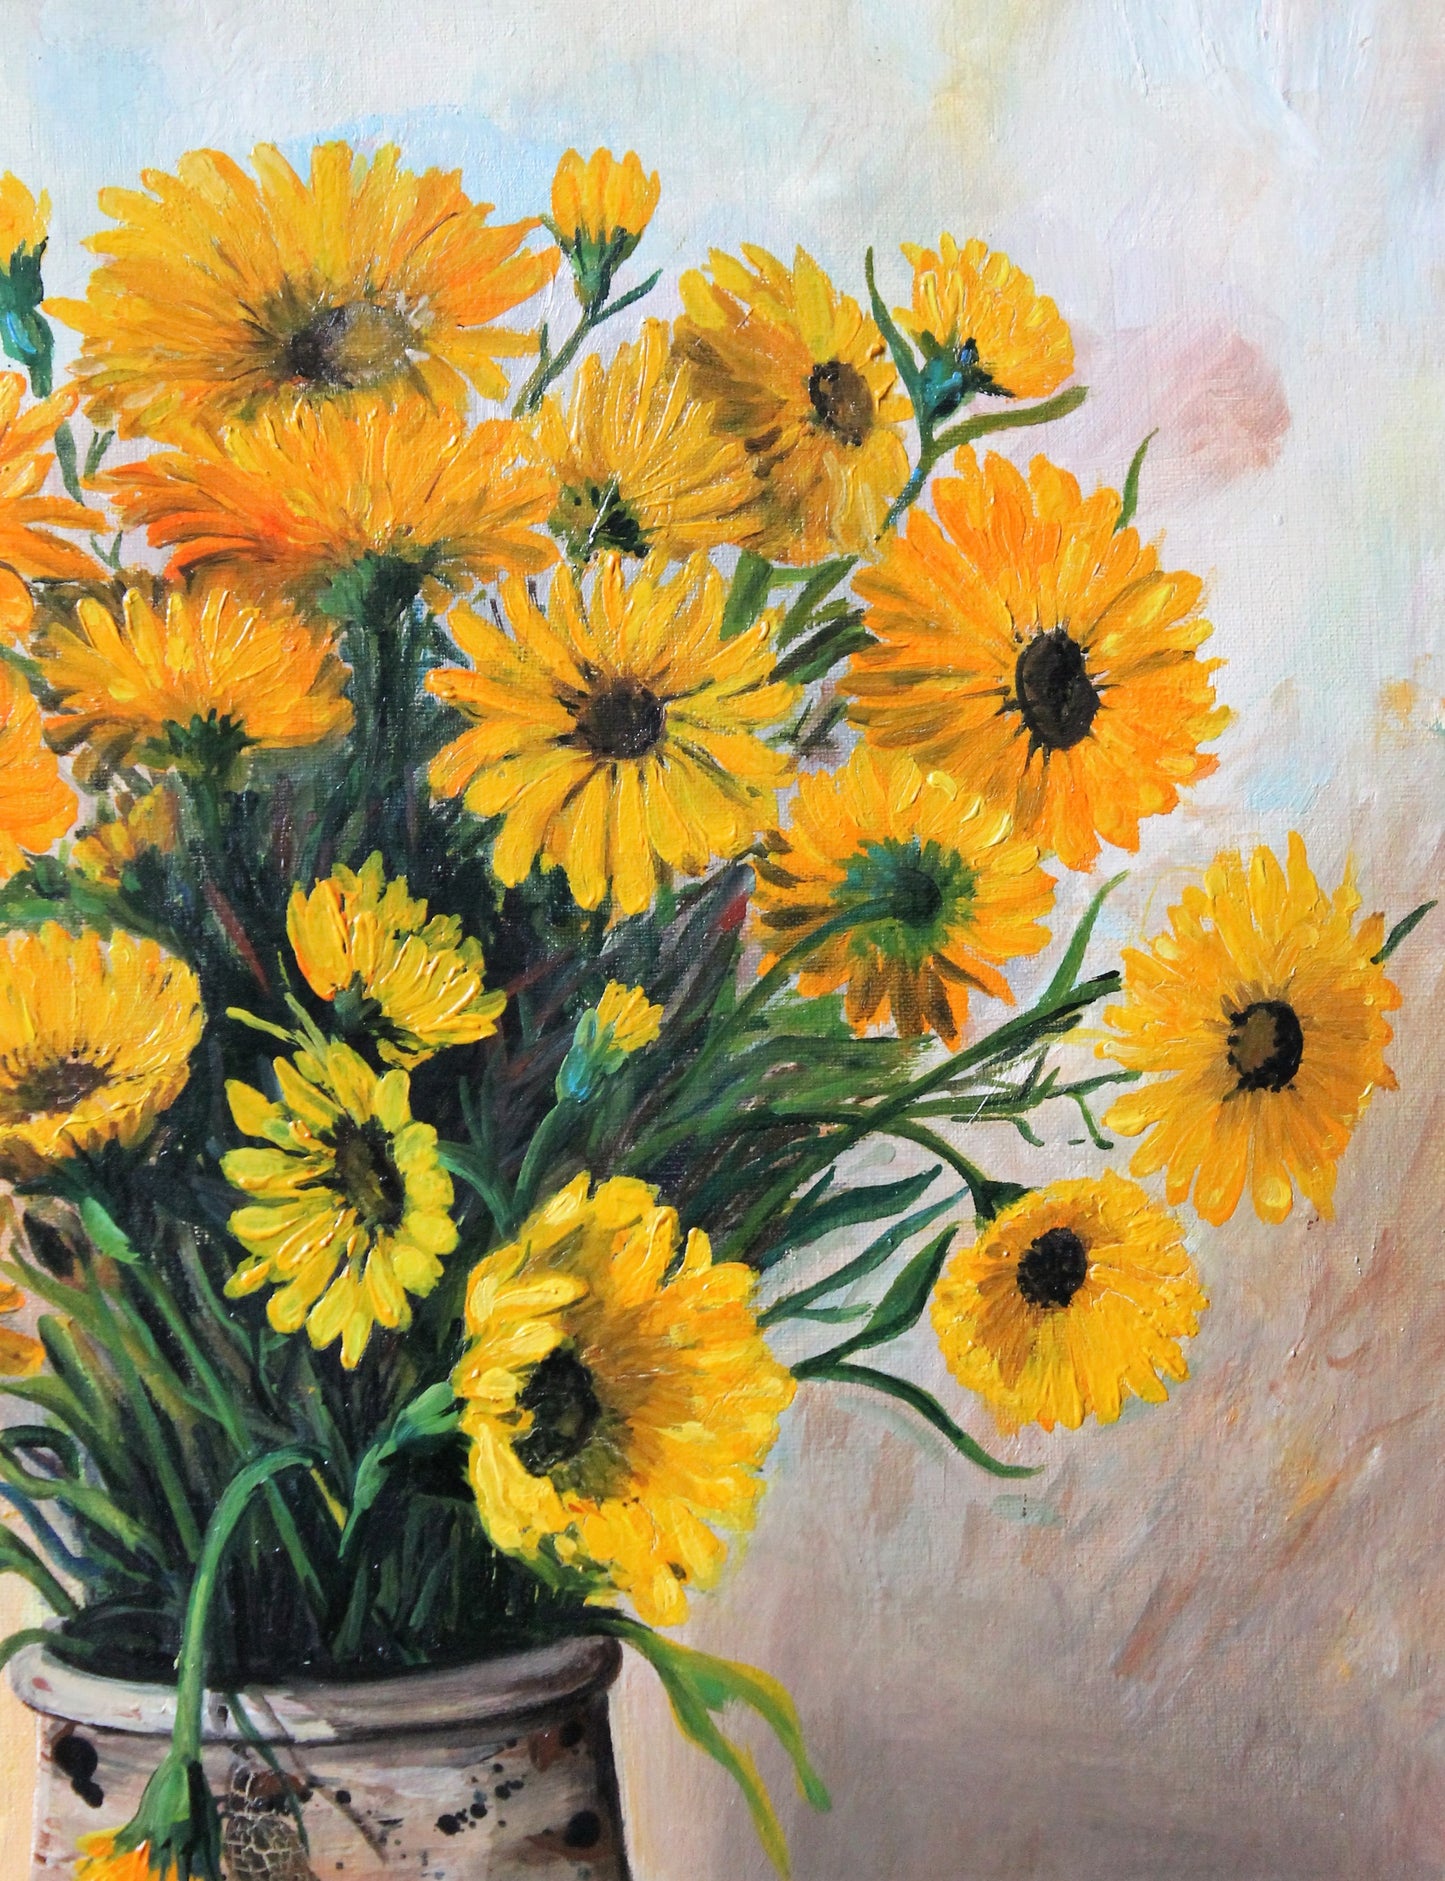 Viollet F. "Bouquet of yellow flowers"